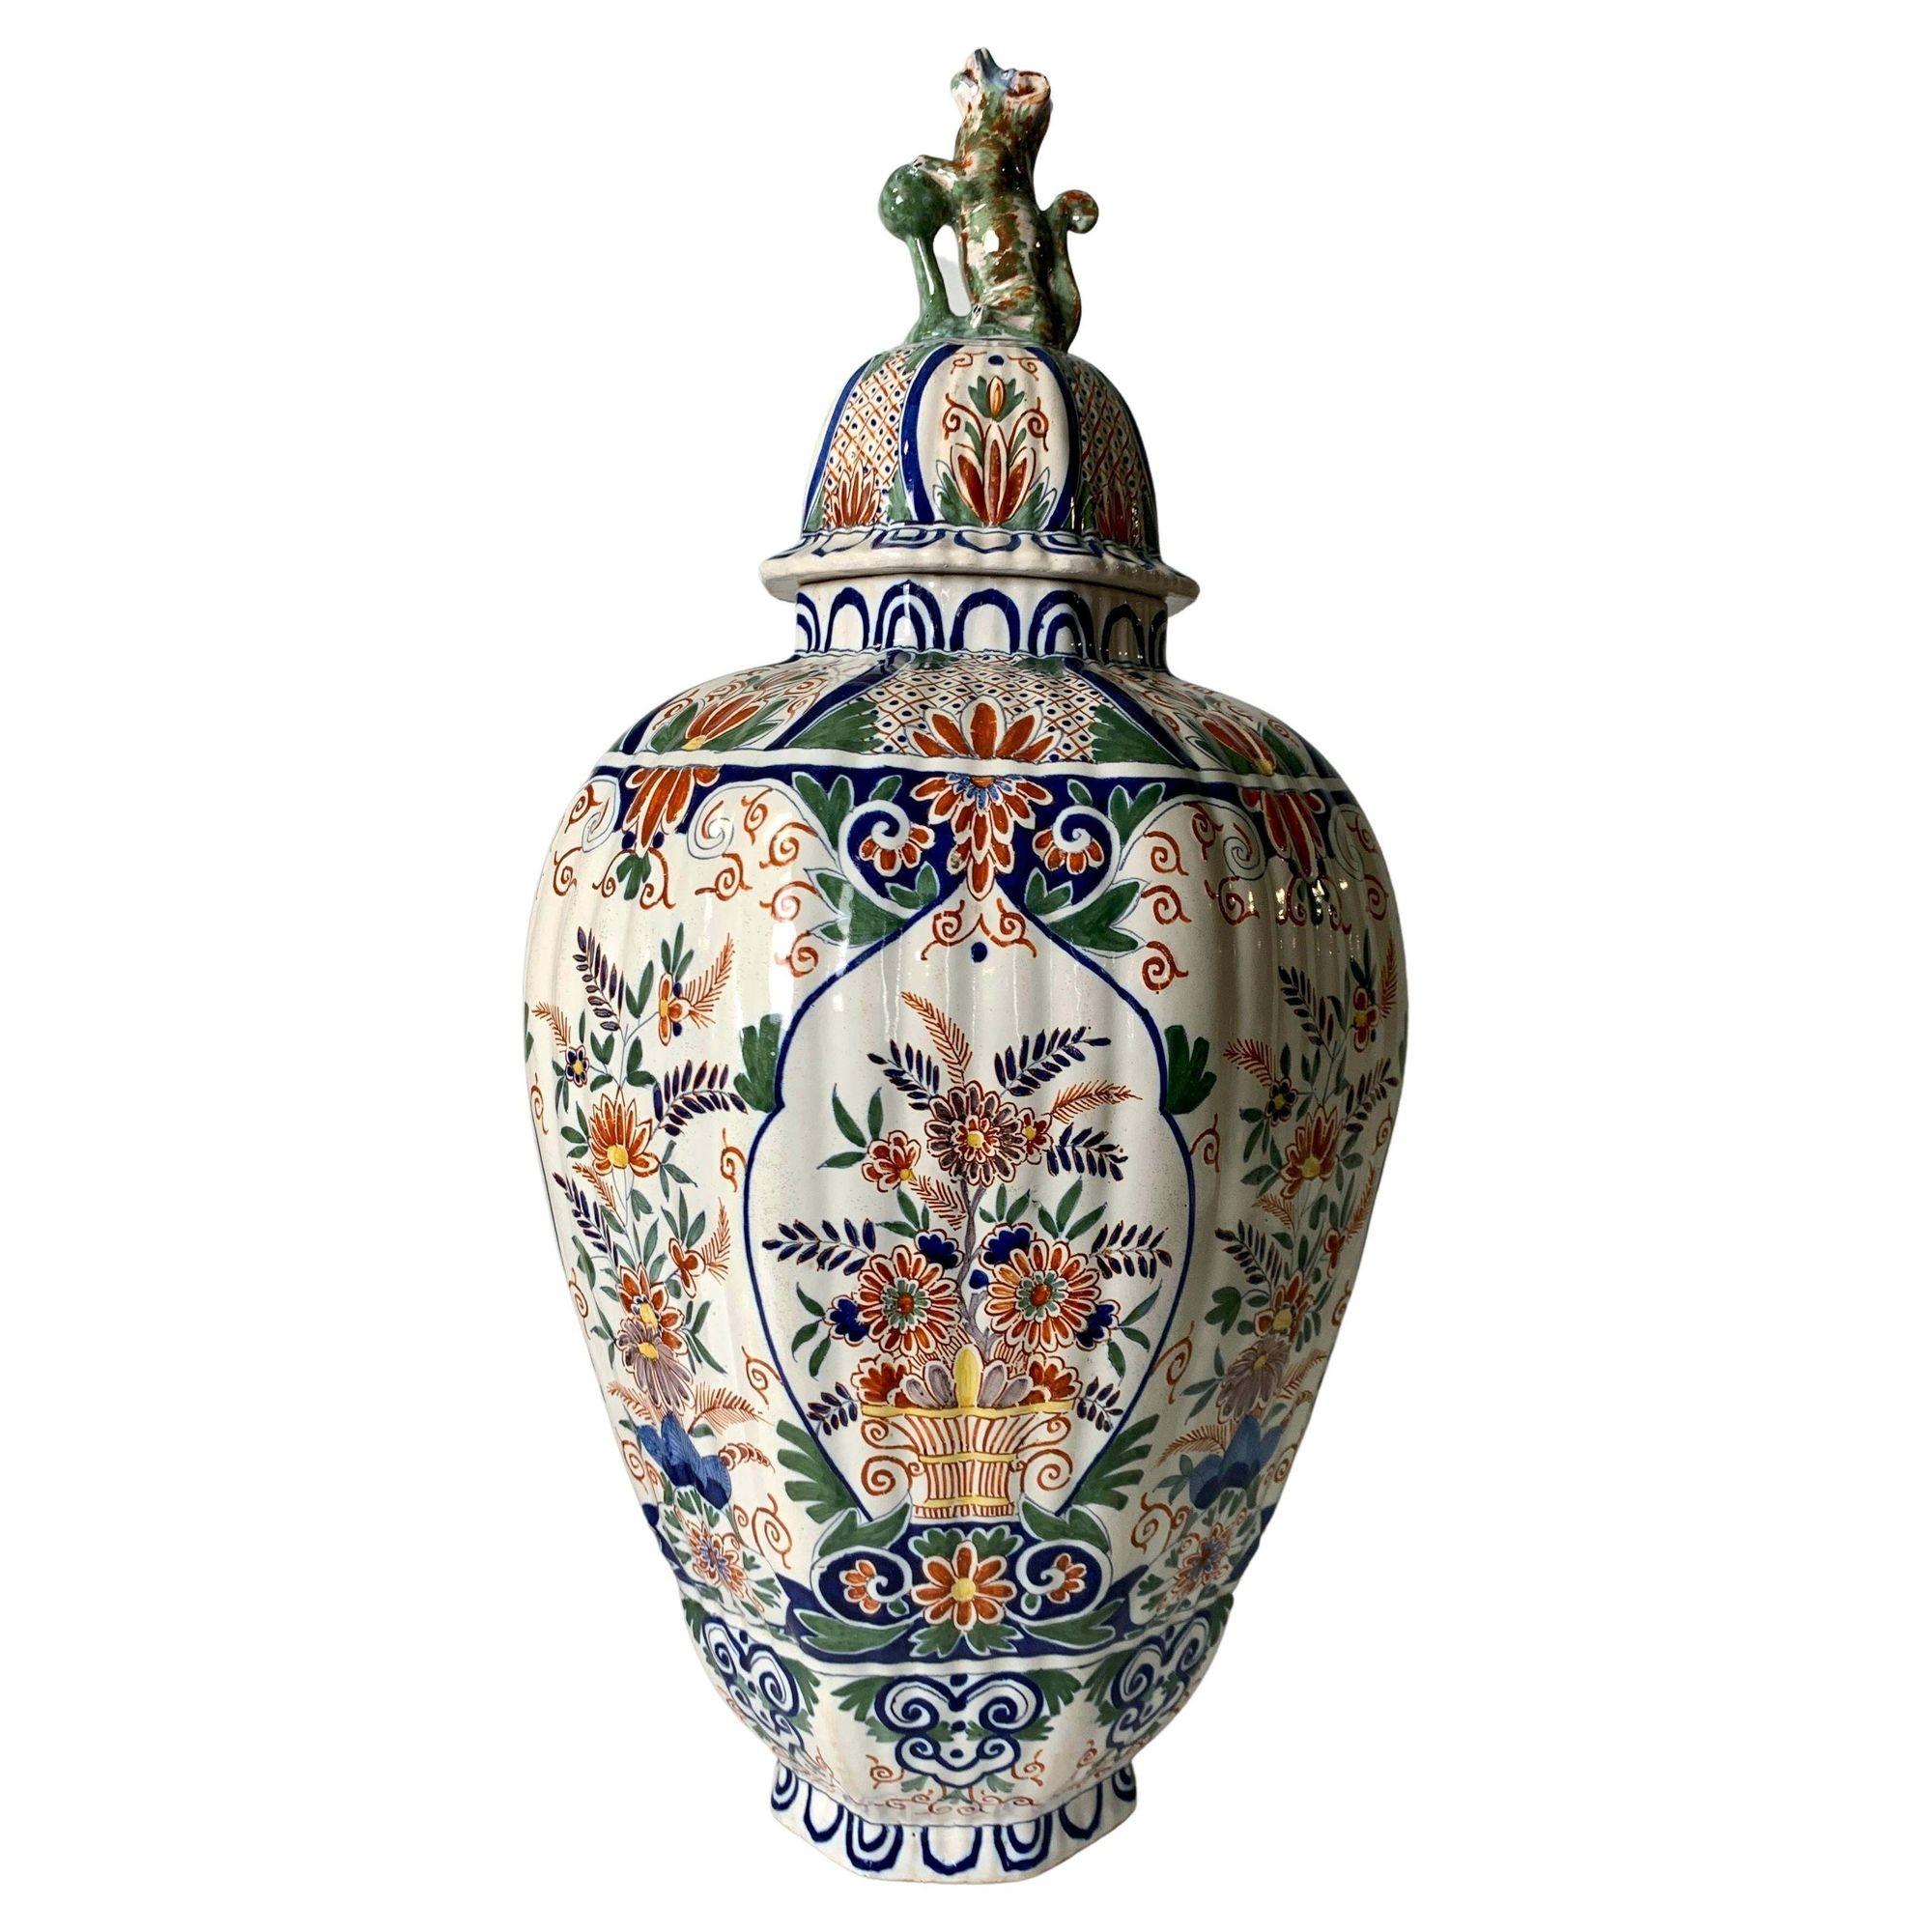 Giant jars like these were luxury items made to be displayed in the most important showplace in the home. They are crafted with the utmost care and attention to detail, making them luxury items and works of art. The traditional octagonal shape and